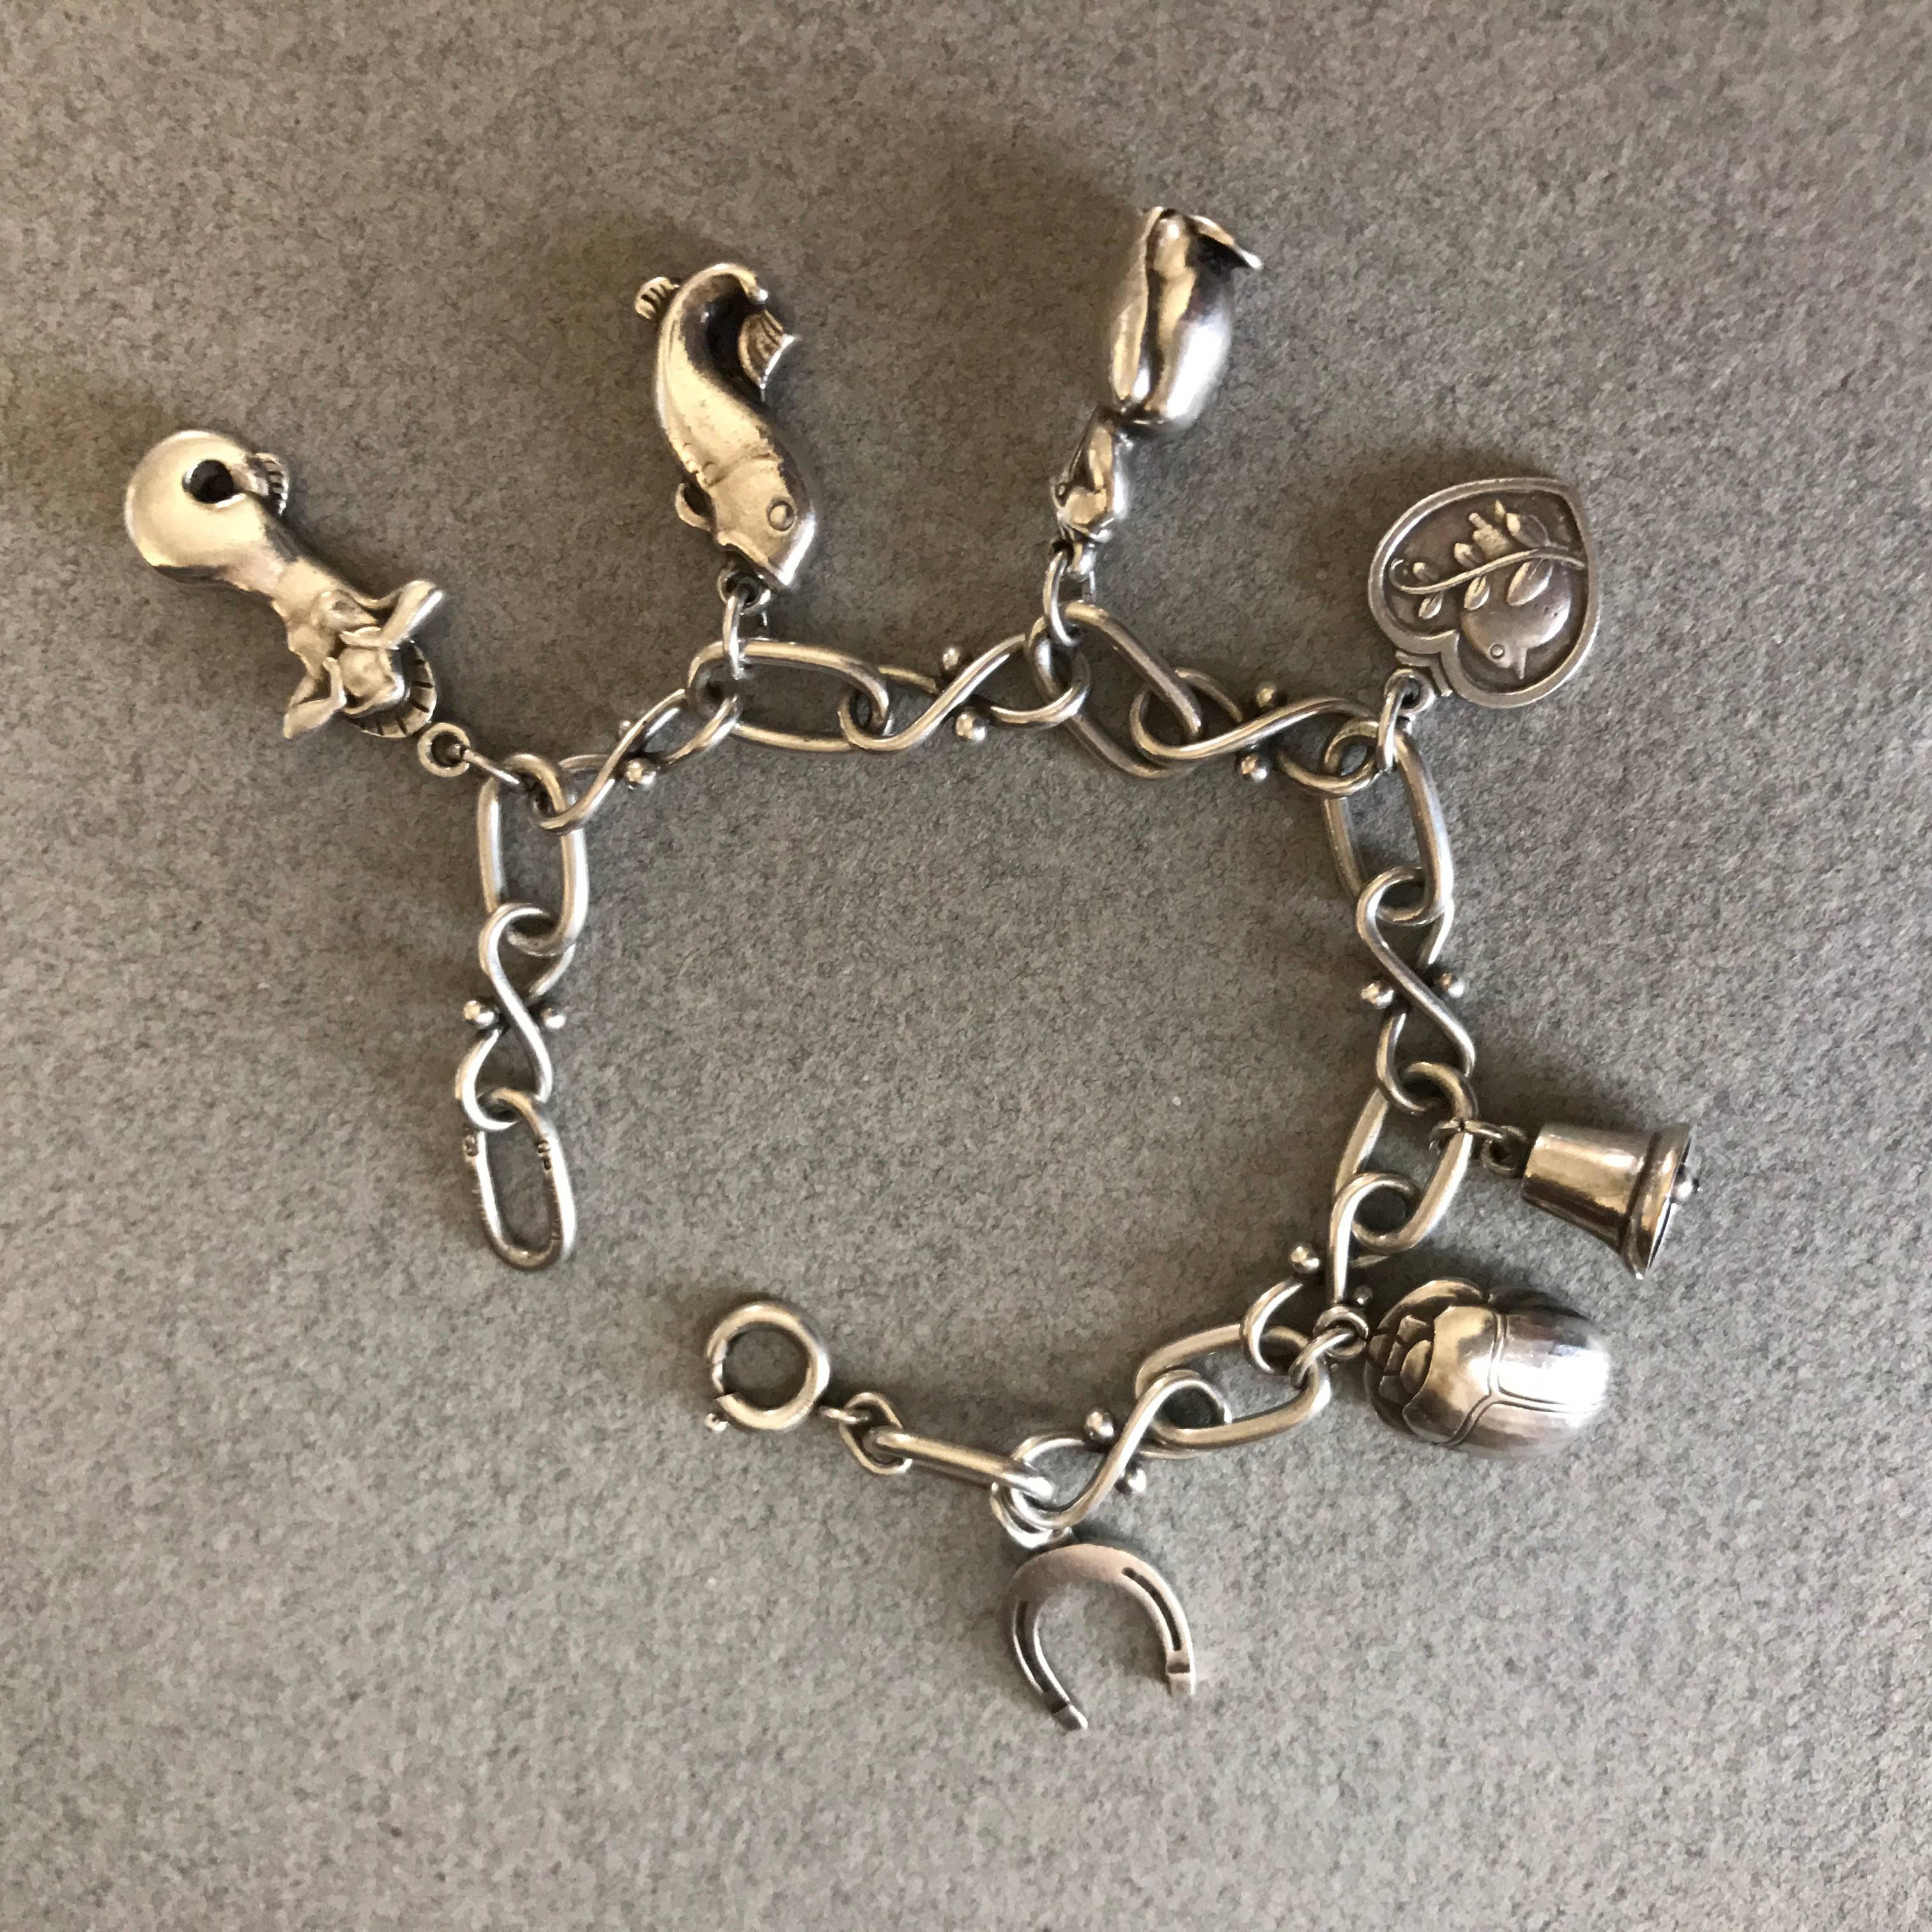 Georg Jensen Sterling Silver Charm Bracelet No. 80.

This is a rare find. Seven unique, solid Georg Jensen sterling silver charms, each stamped with Georg Jensen sterling marks. Comes with original box from the Georg Jensen store on 5th Avenue, New